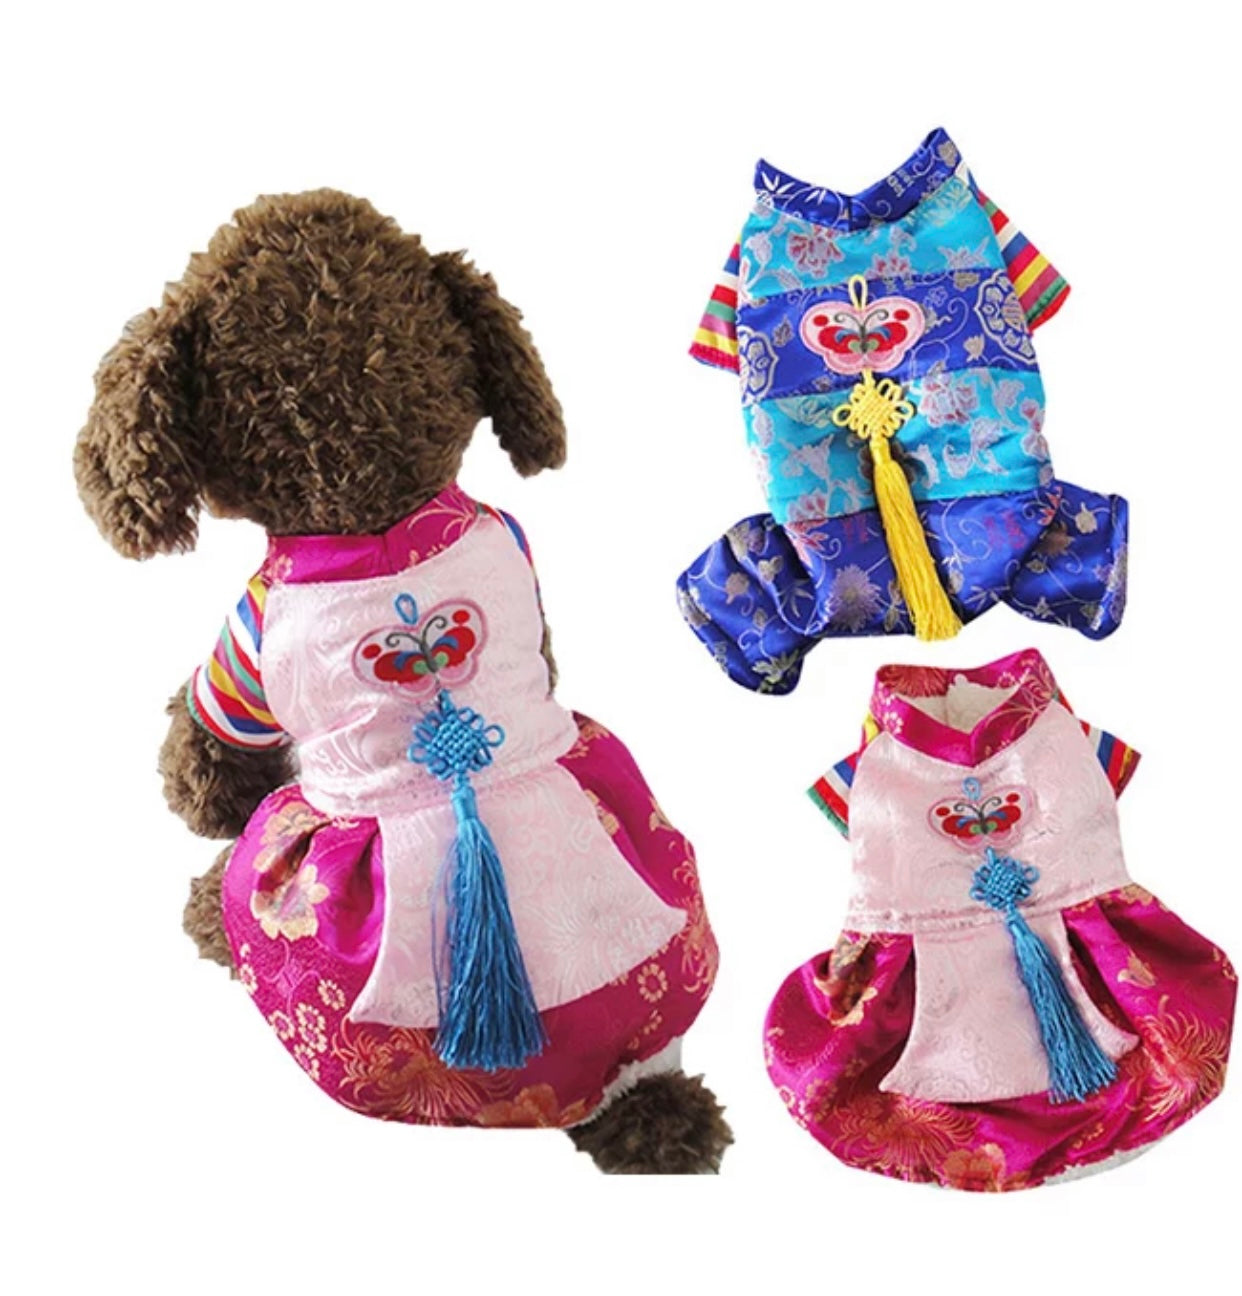 Winter Korean Traditional Hanbok Suit for Dogs (Pink)